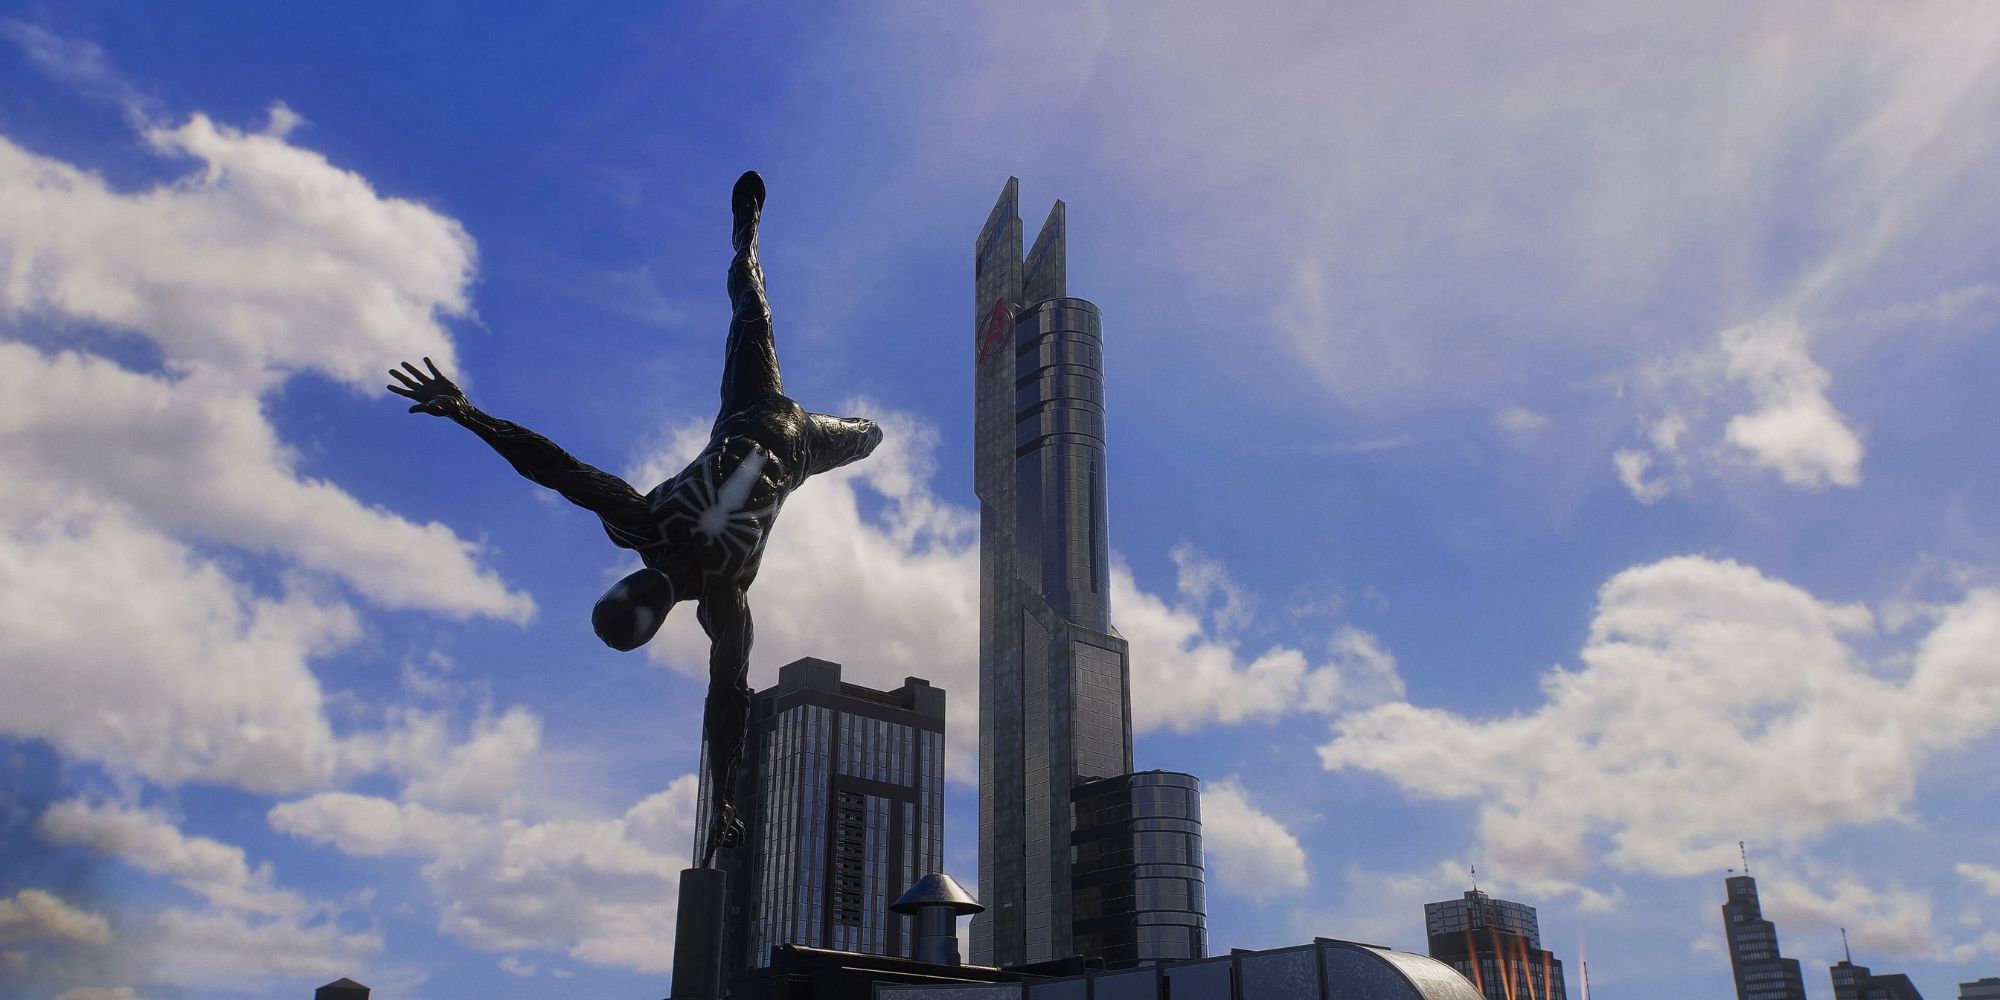 Spider-Man in a black suit doing a handstand with the Avenger's Tower in the background